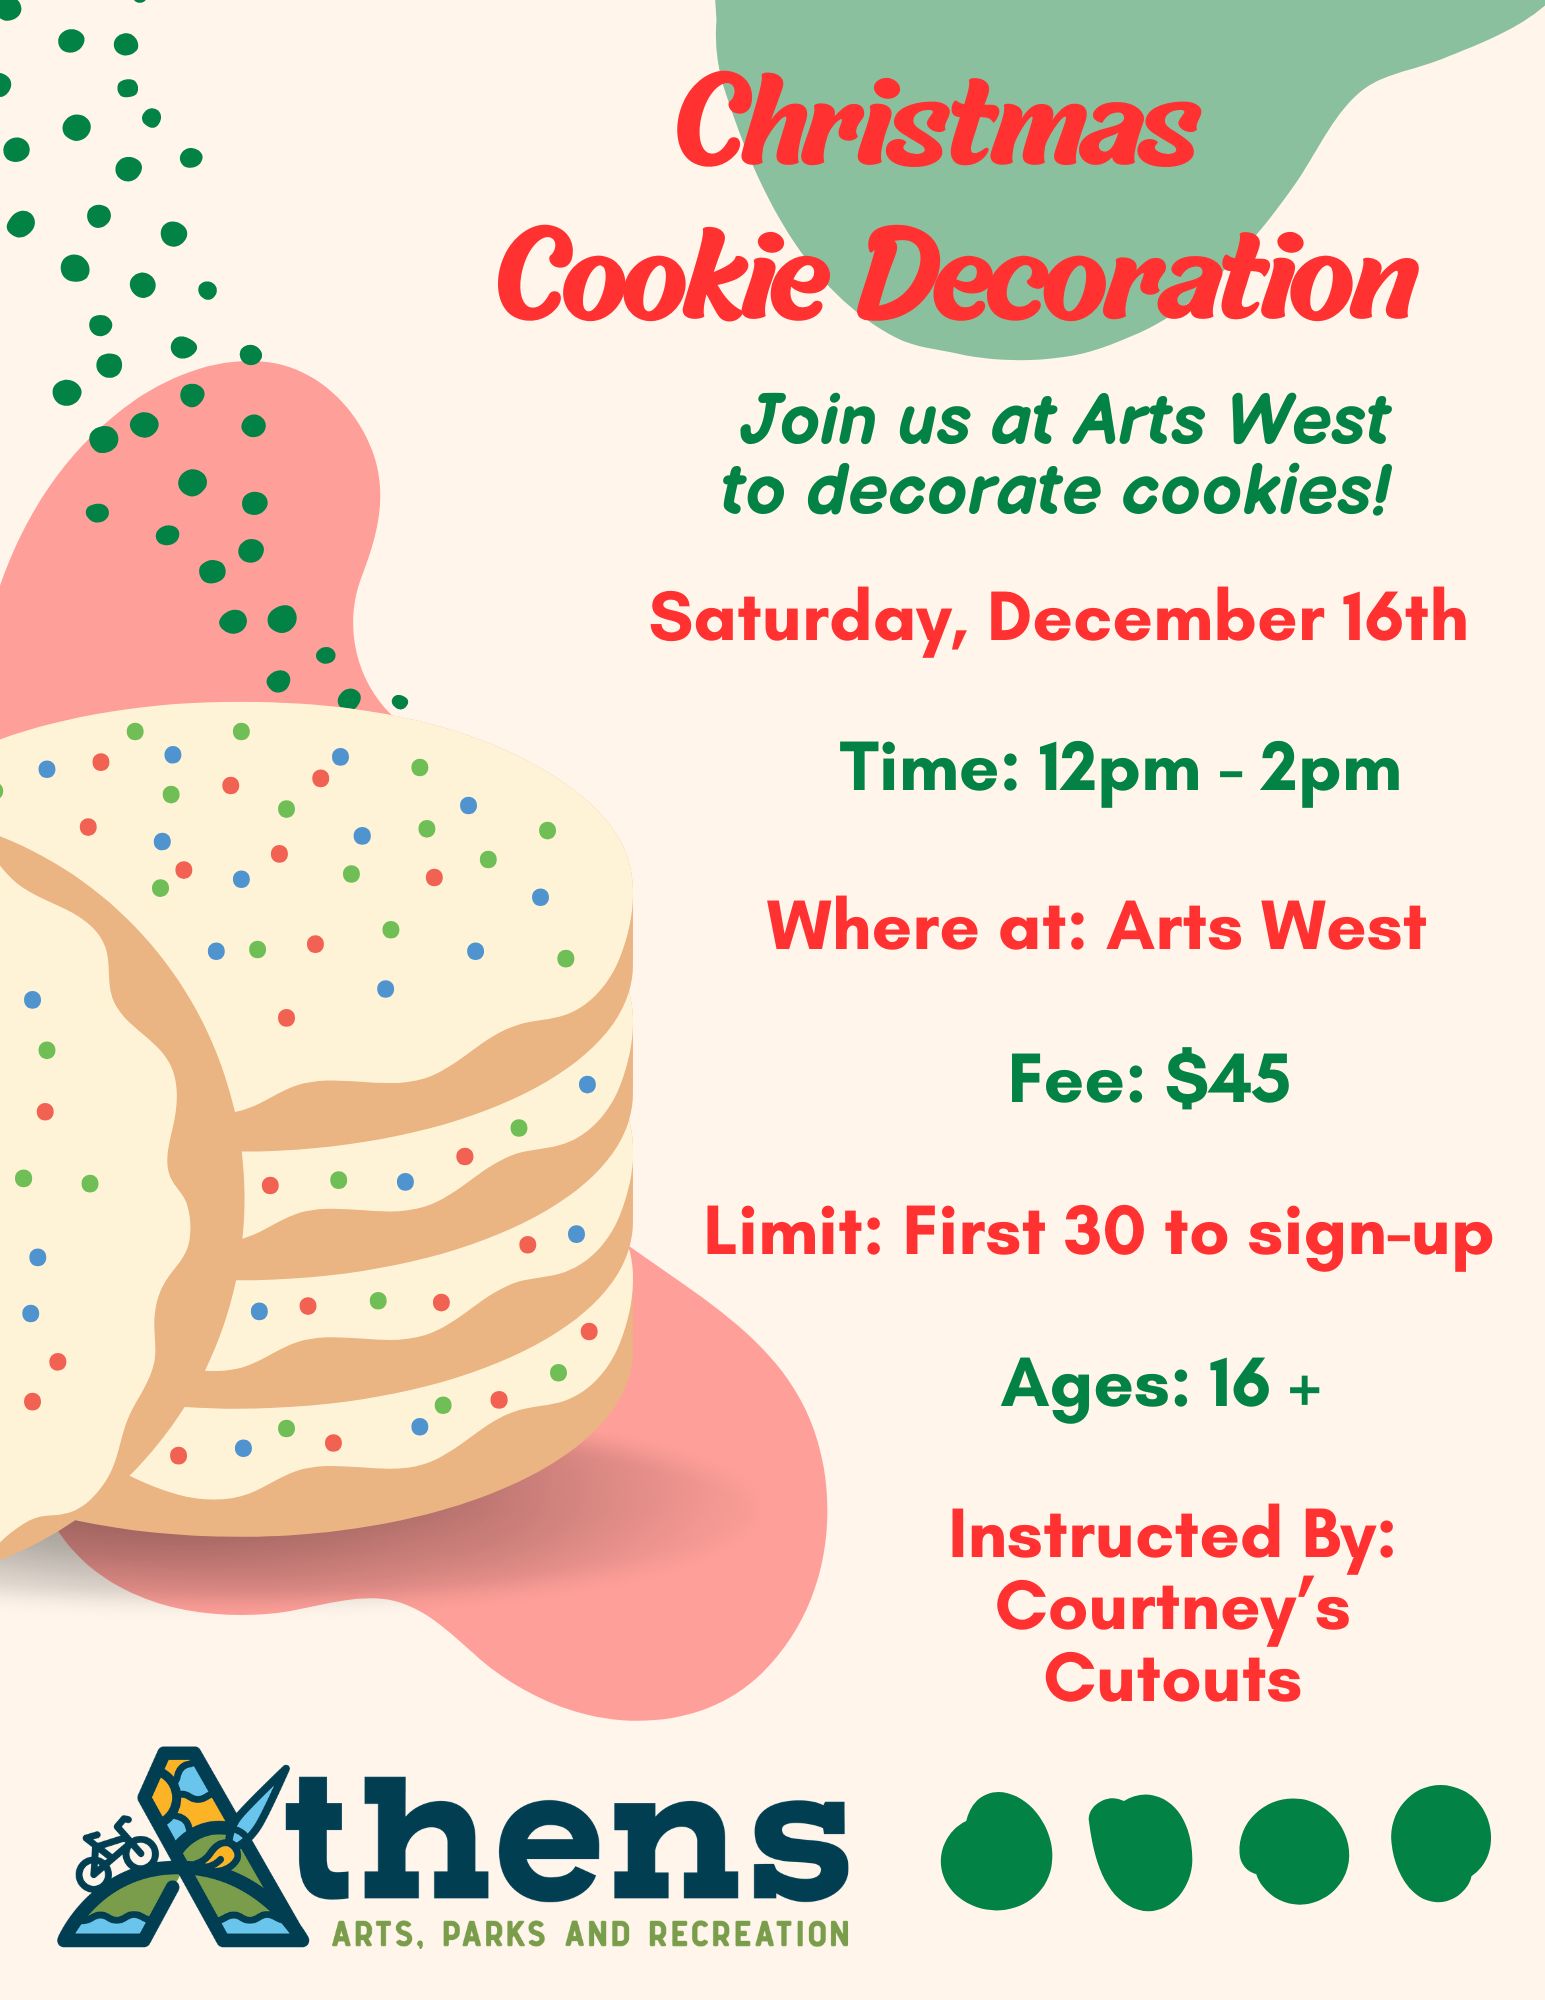 An image of a flyer for the Christmas Cookie Decoration class for adults.